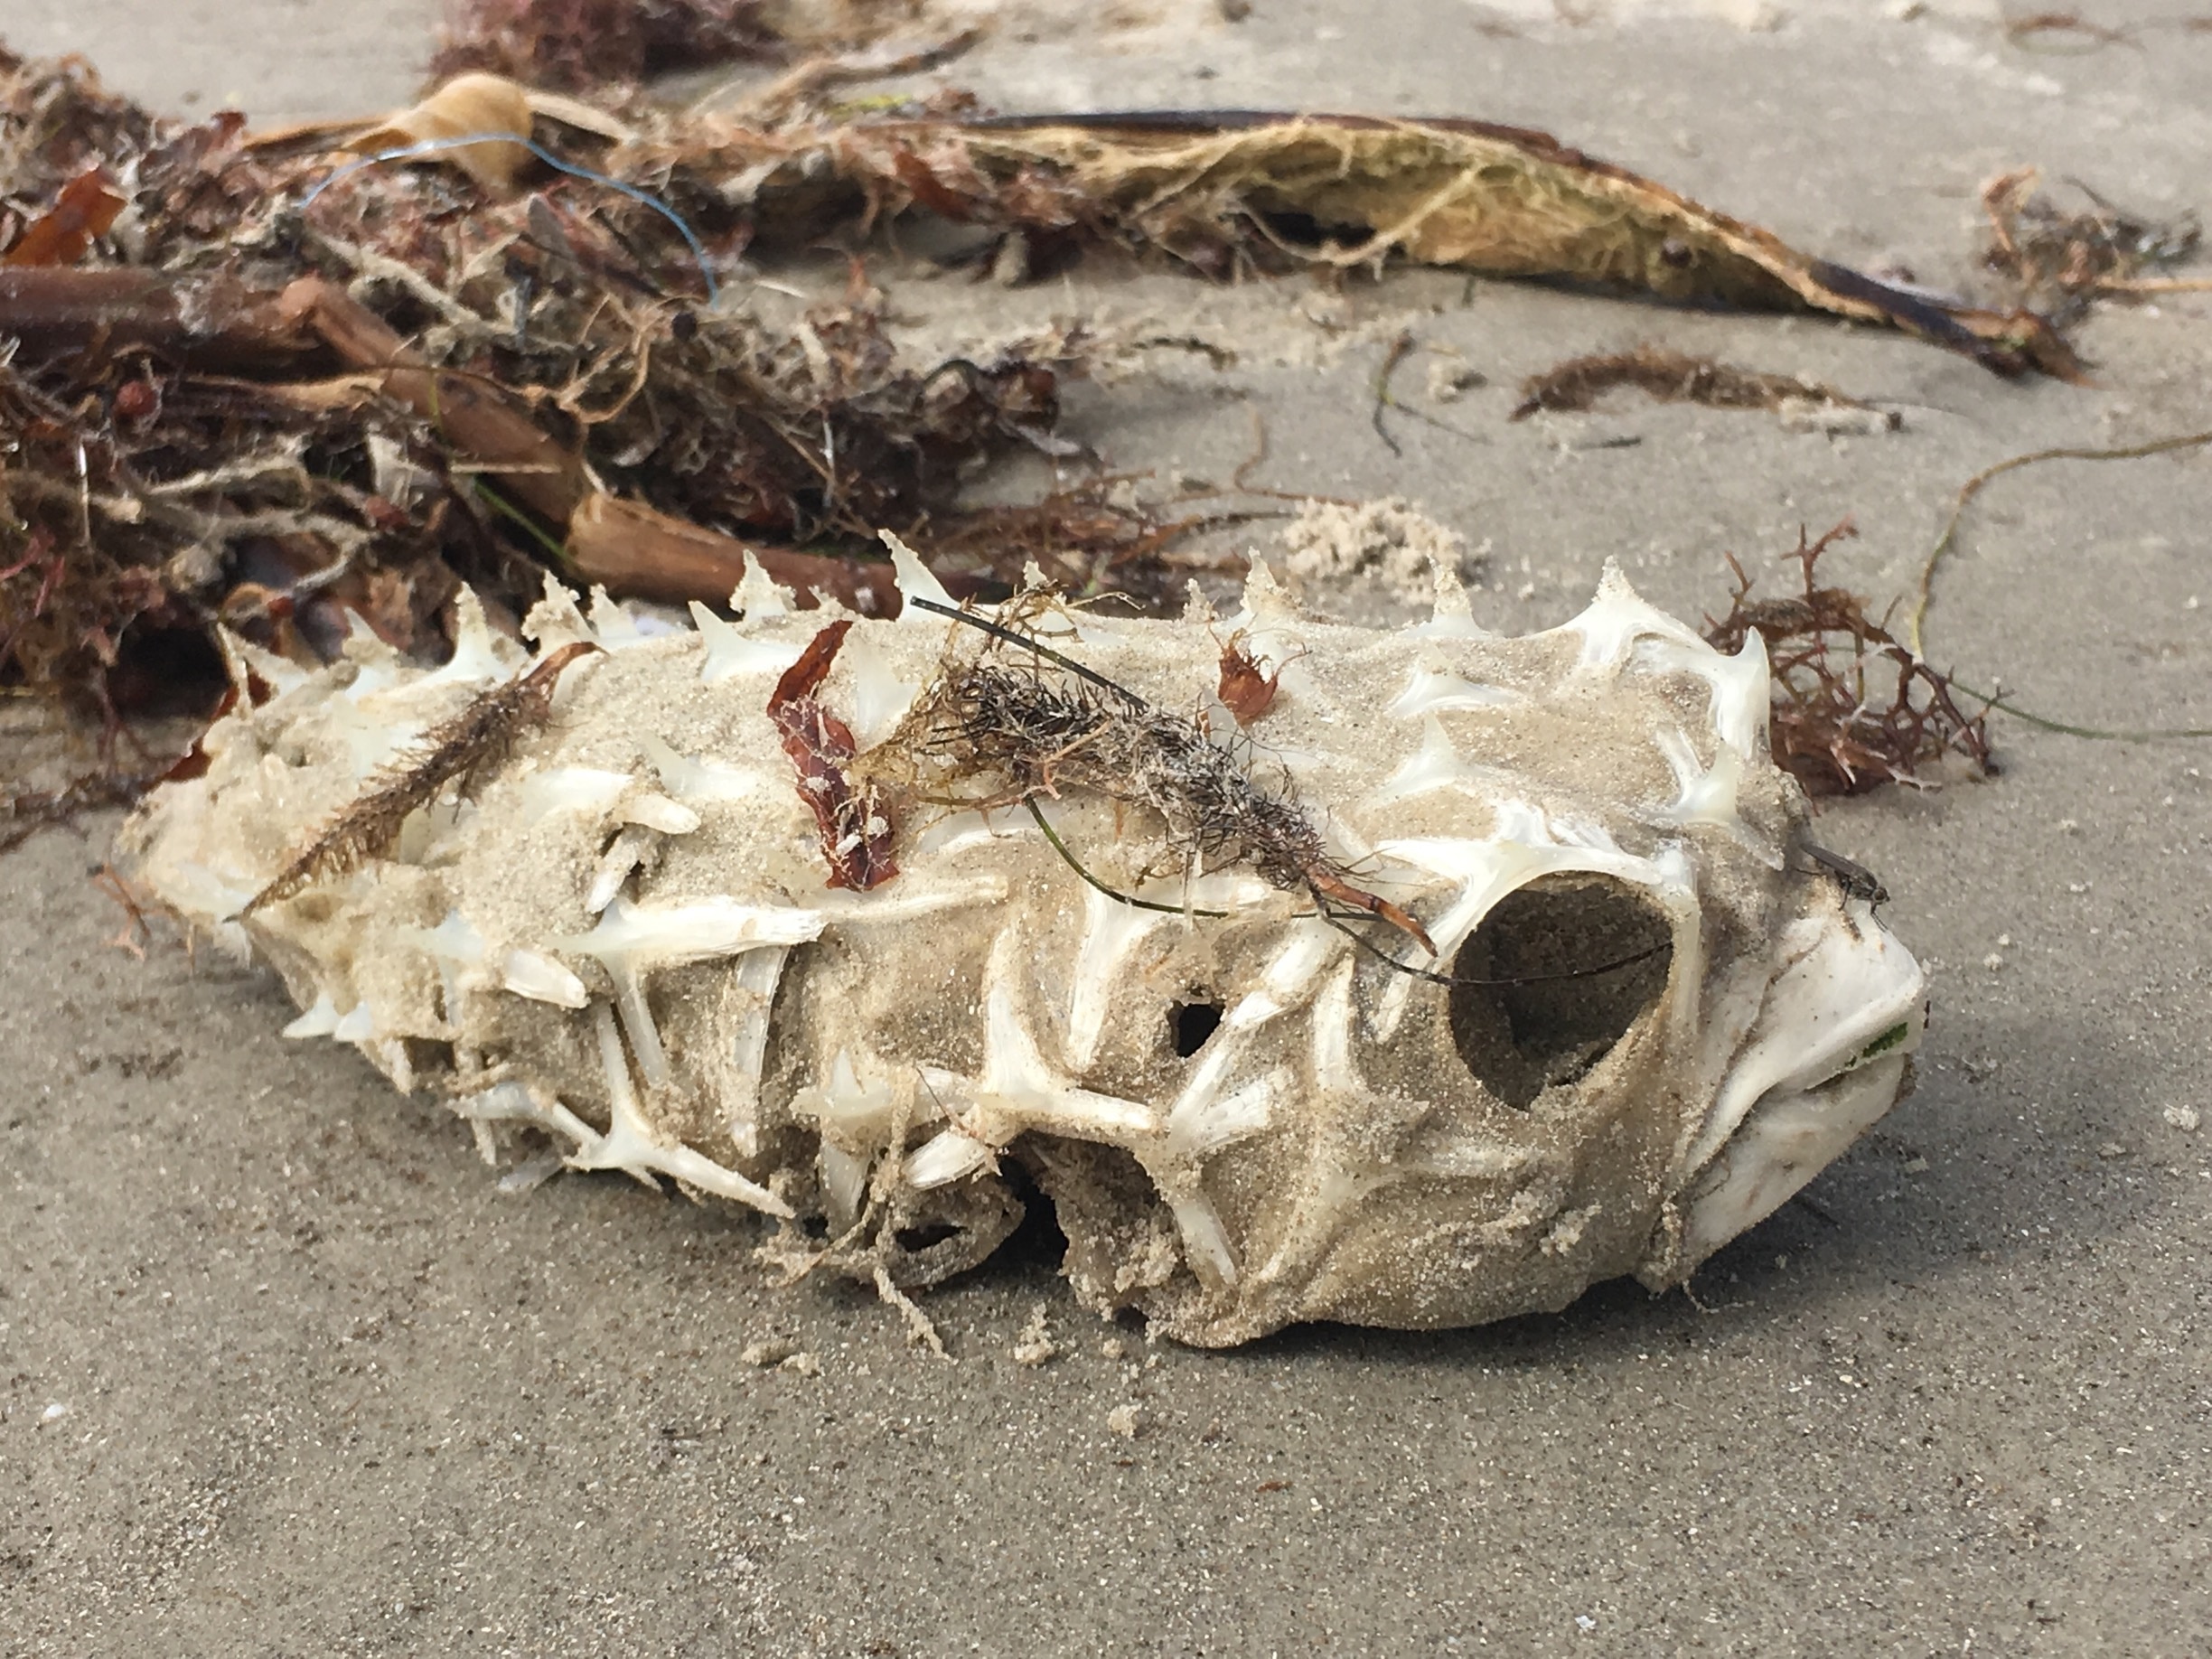 Mustang Island,Texas.
While enjoying a beautiful day on the beach next to our campsite,came across an amazing blowfish skeleton!
How cool is that!

If you are looking for a place to wake up with a beautiful sunrise and sit by the fire with the sound of the ocean-check out this place!

#Patterns#Texaswildlife#blowfish#skeleton
